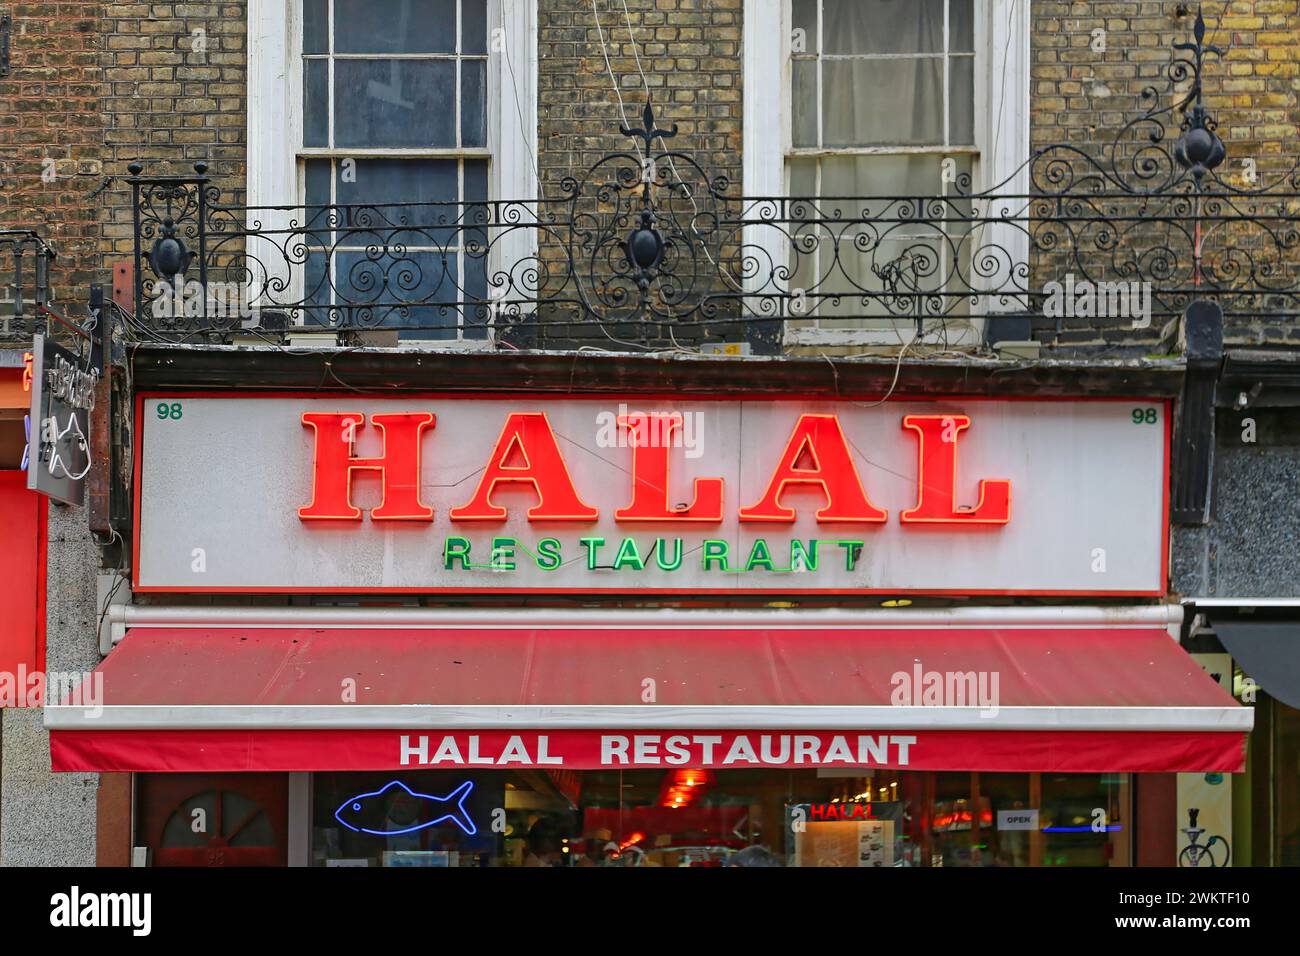 London, United Kingdom - November 24, 2013: Big Red Neon Sign Halal at Middle East Cuisine Restaurant in City Centre. Stock Photo